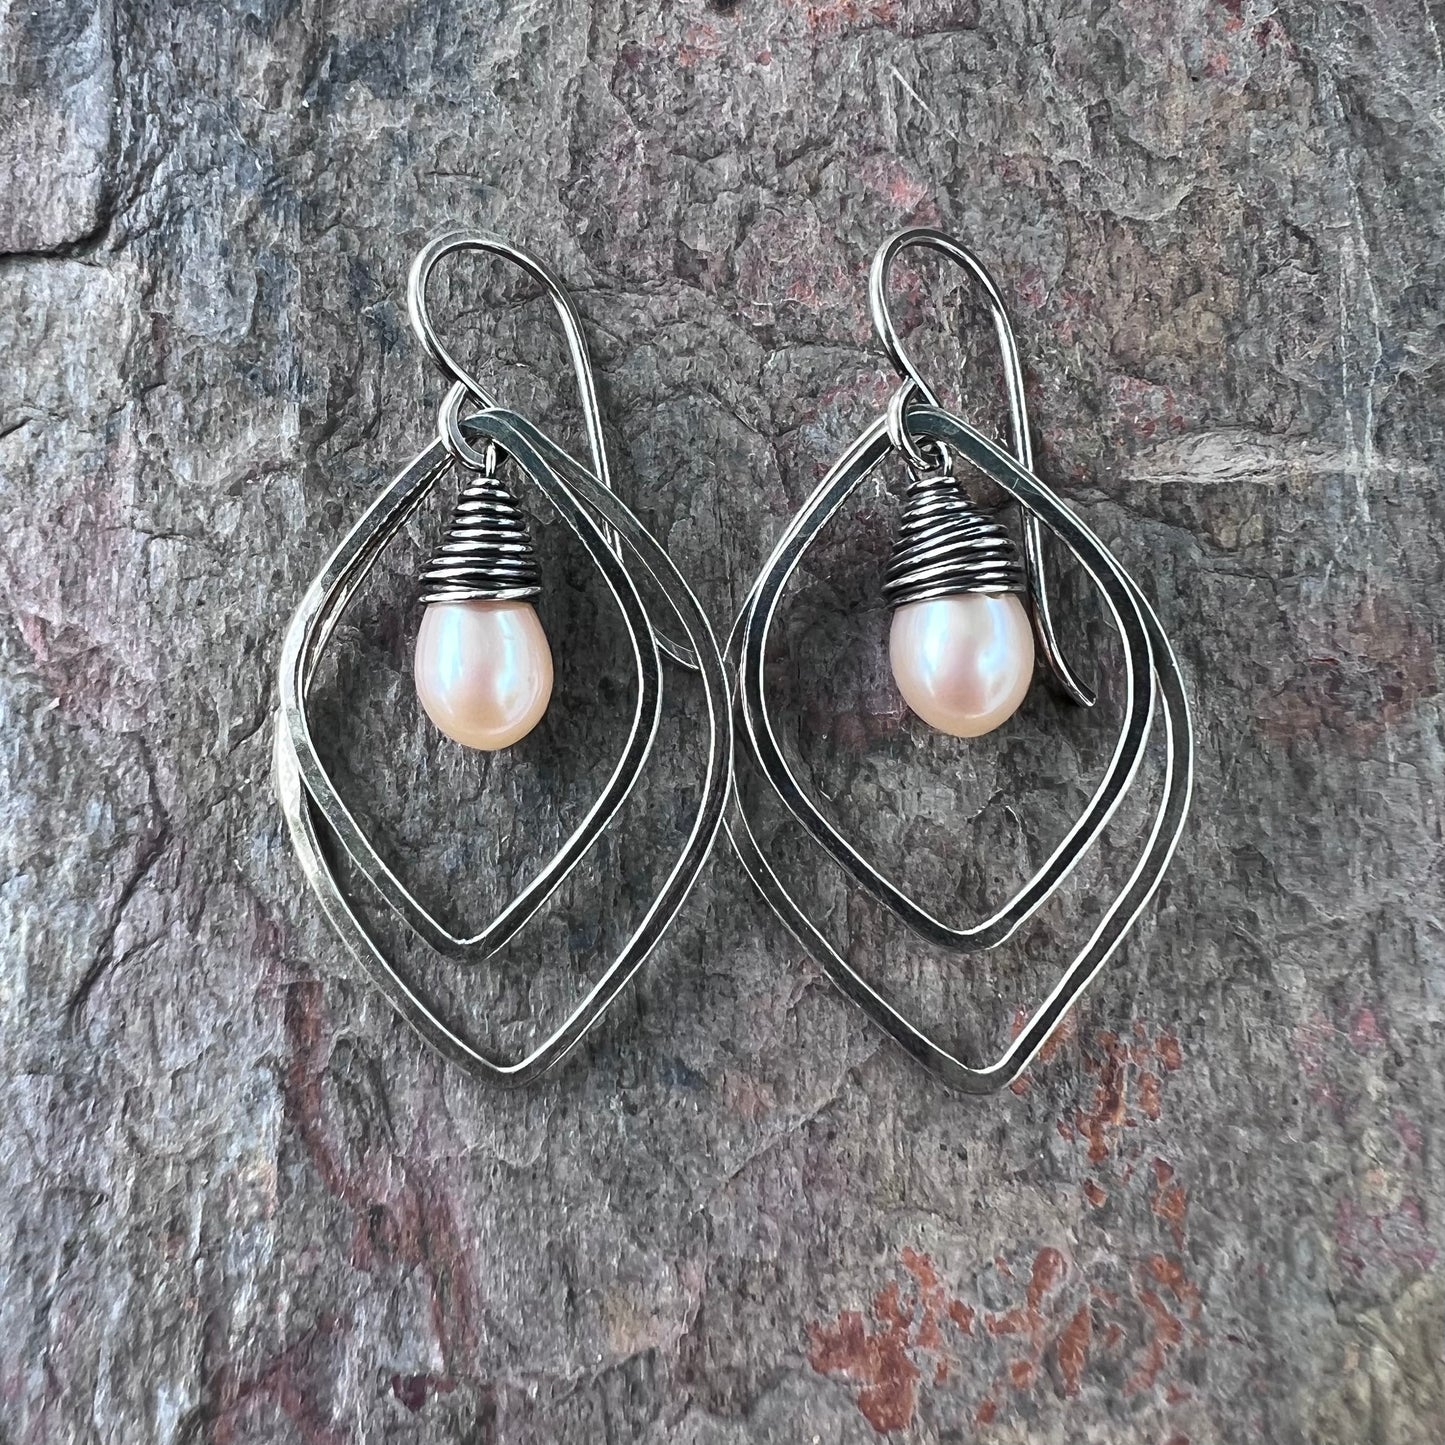 Pearl and Sterling Silver Earrings - Wire-Wrapped Pearls inside textured Petals on Handmade Sterling Silver Earwires